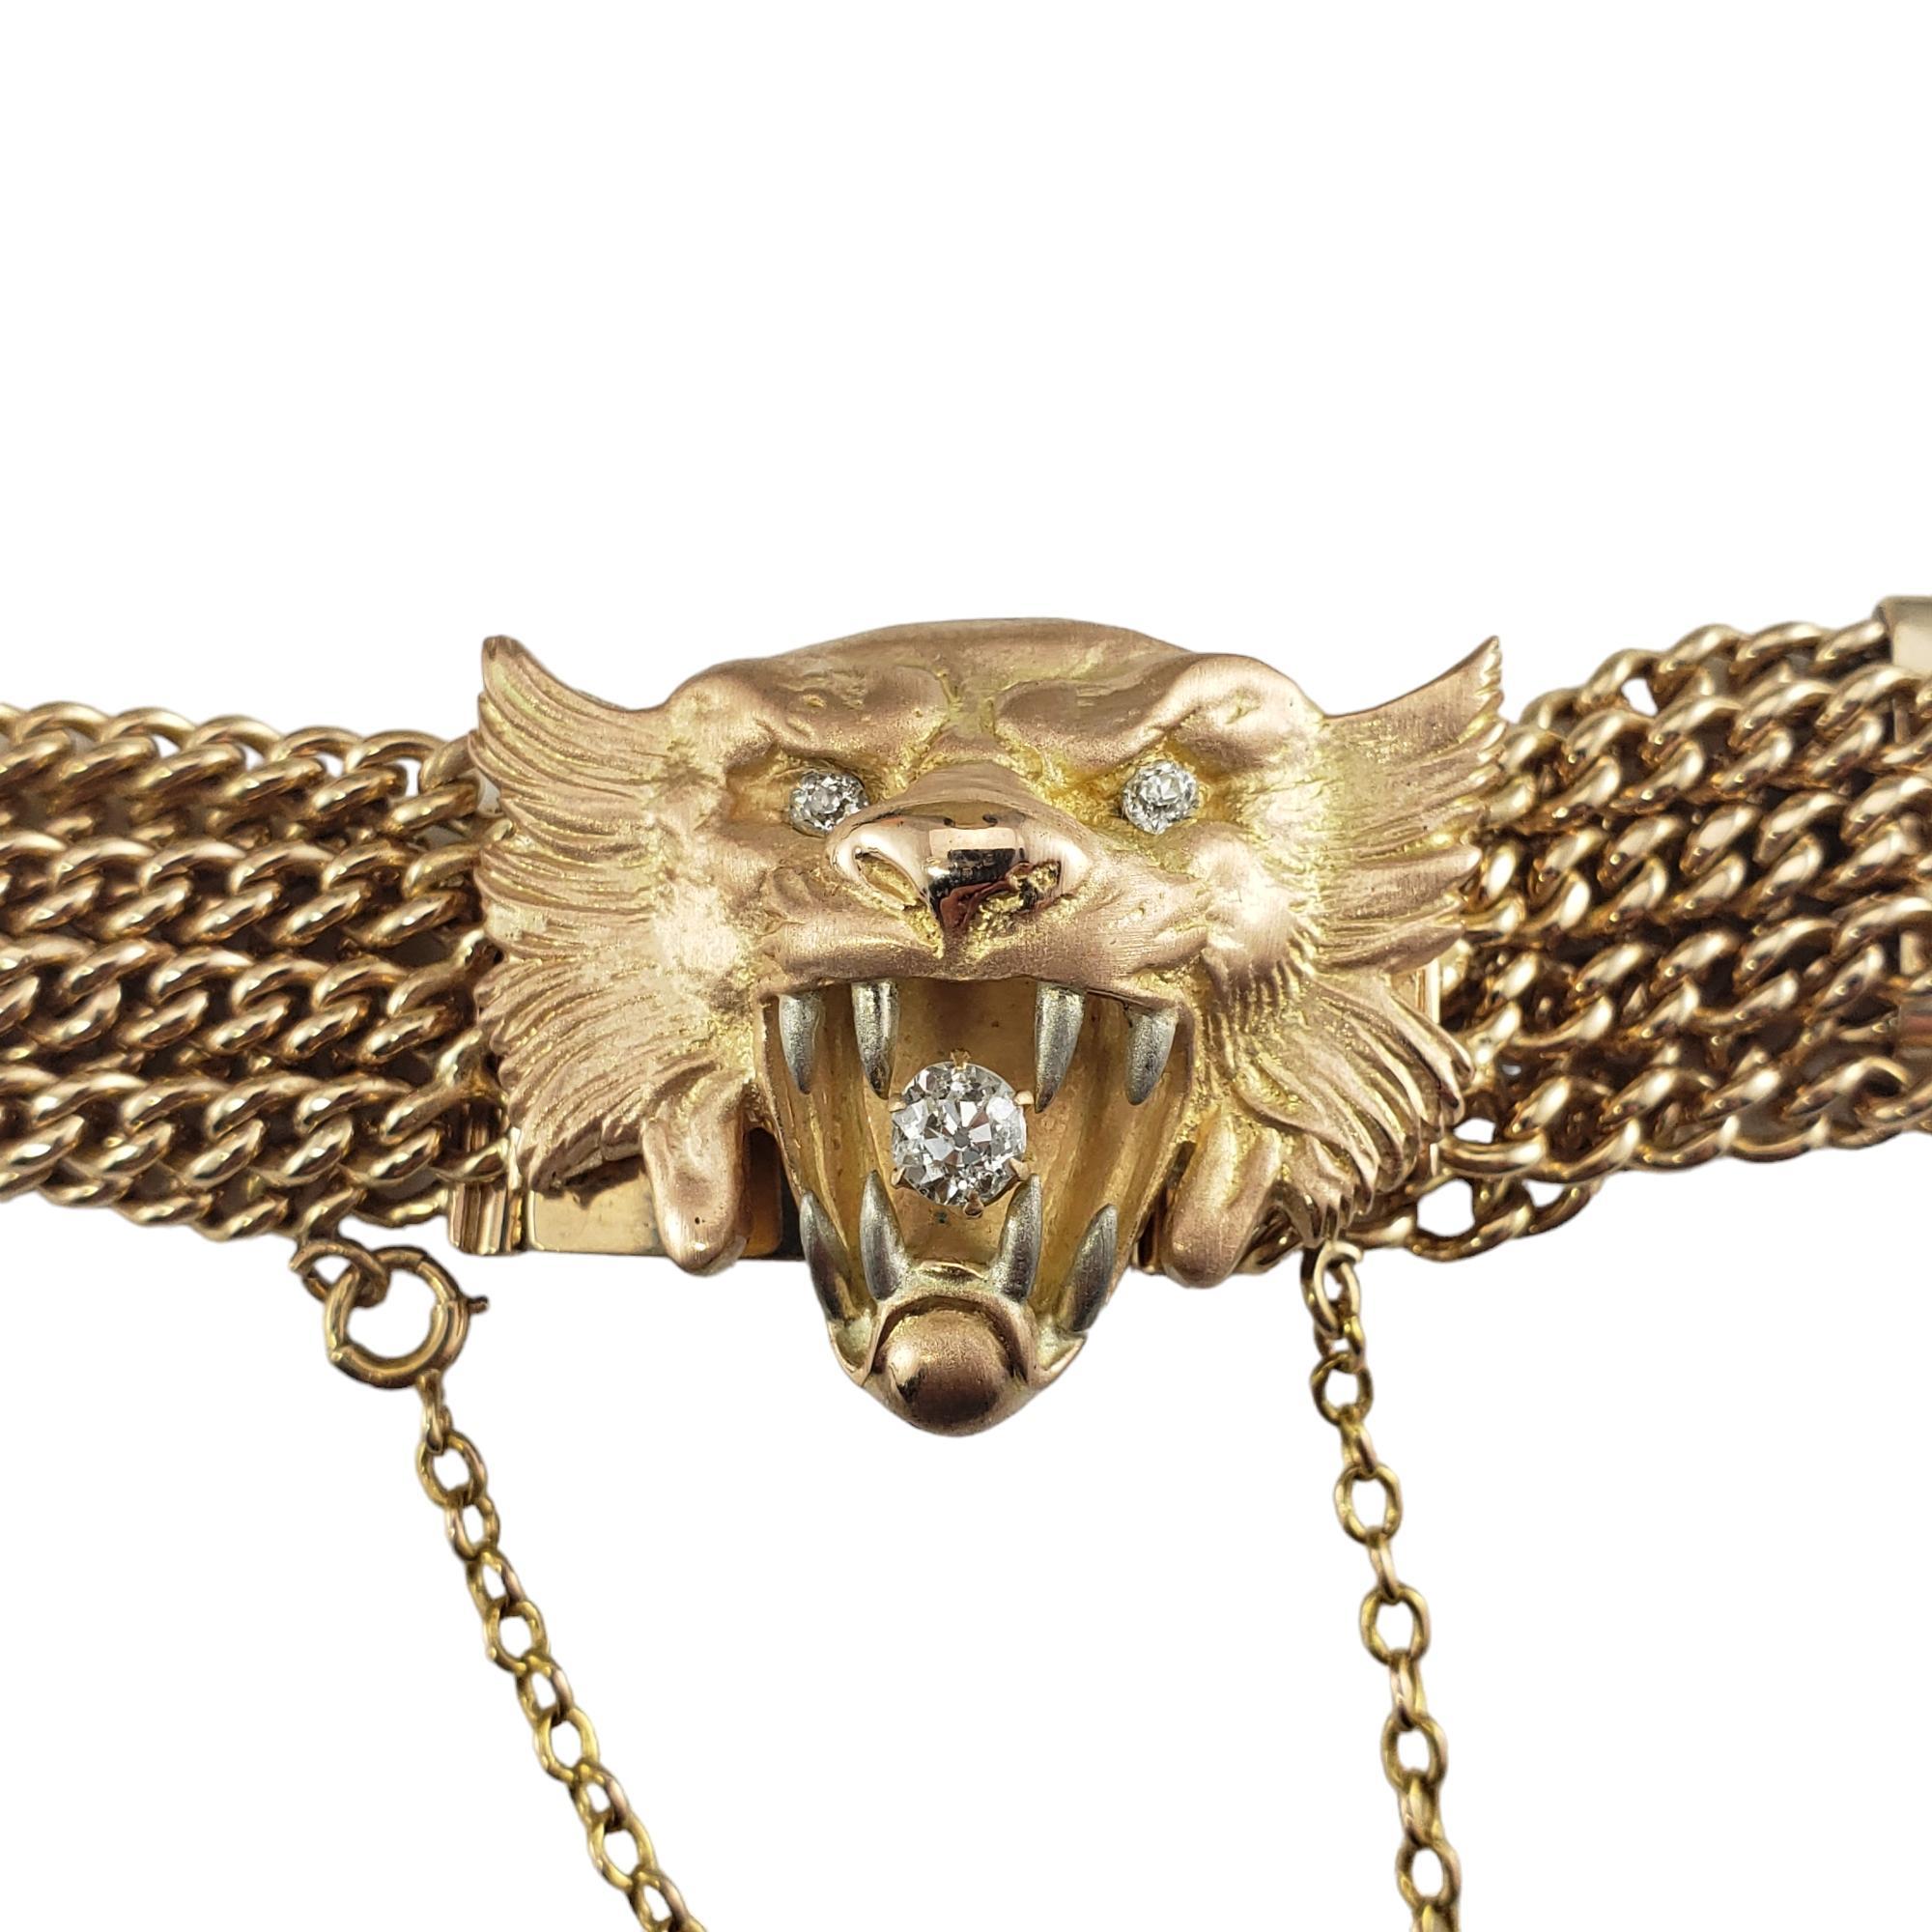 Vintage 14 Karat Yellow Gold and Diamond Tiger Bracelet-

This stunning bracelet features a beautifully detailed tiger head accented with three round old mine cut diamonds set in classic 14K yellow gold. 

Width: 30 mm.

Approximate total diamond